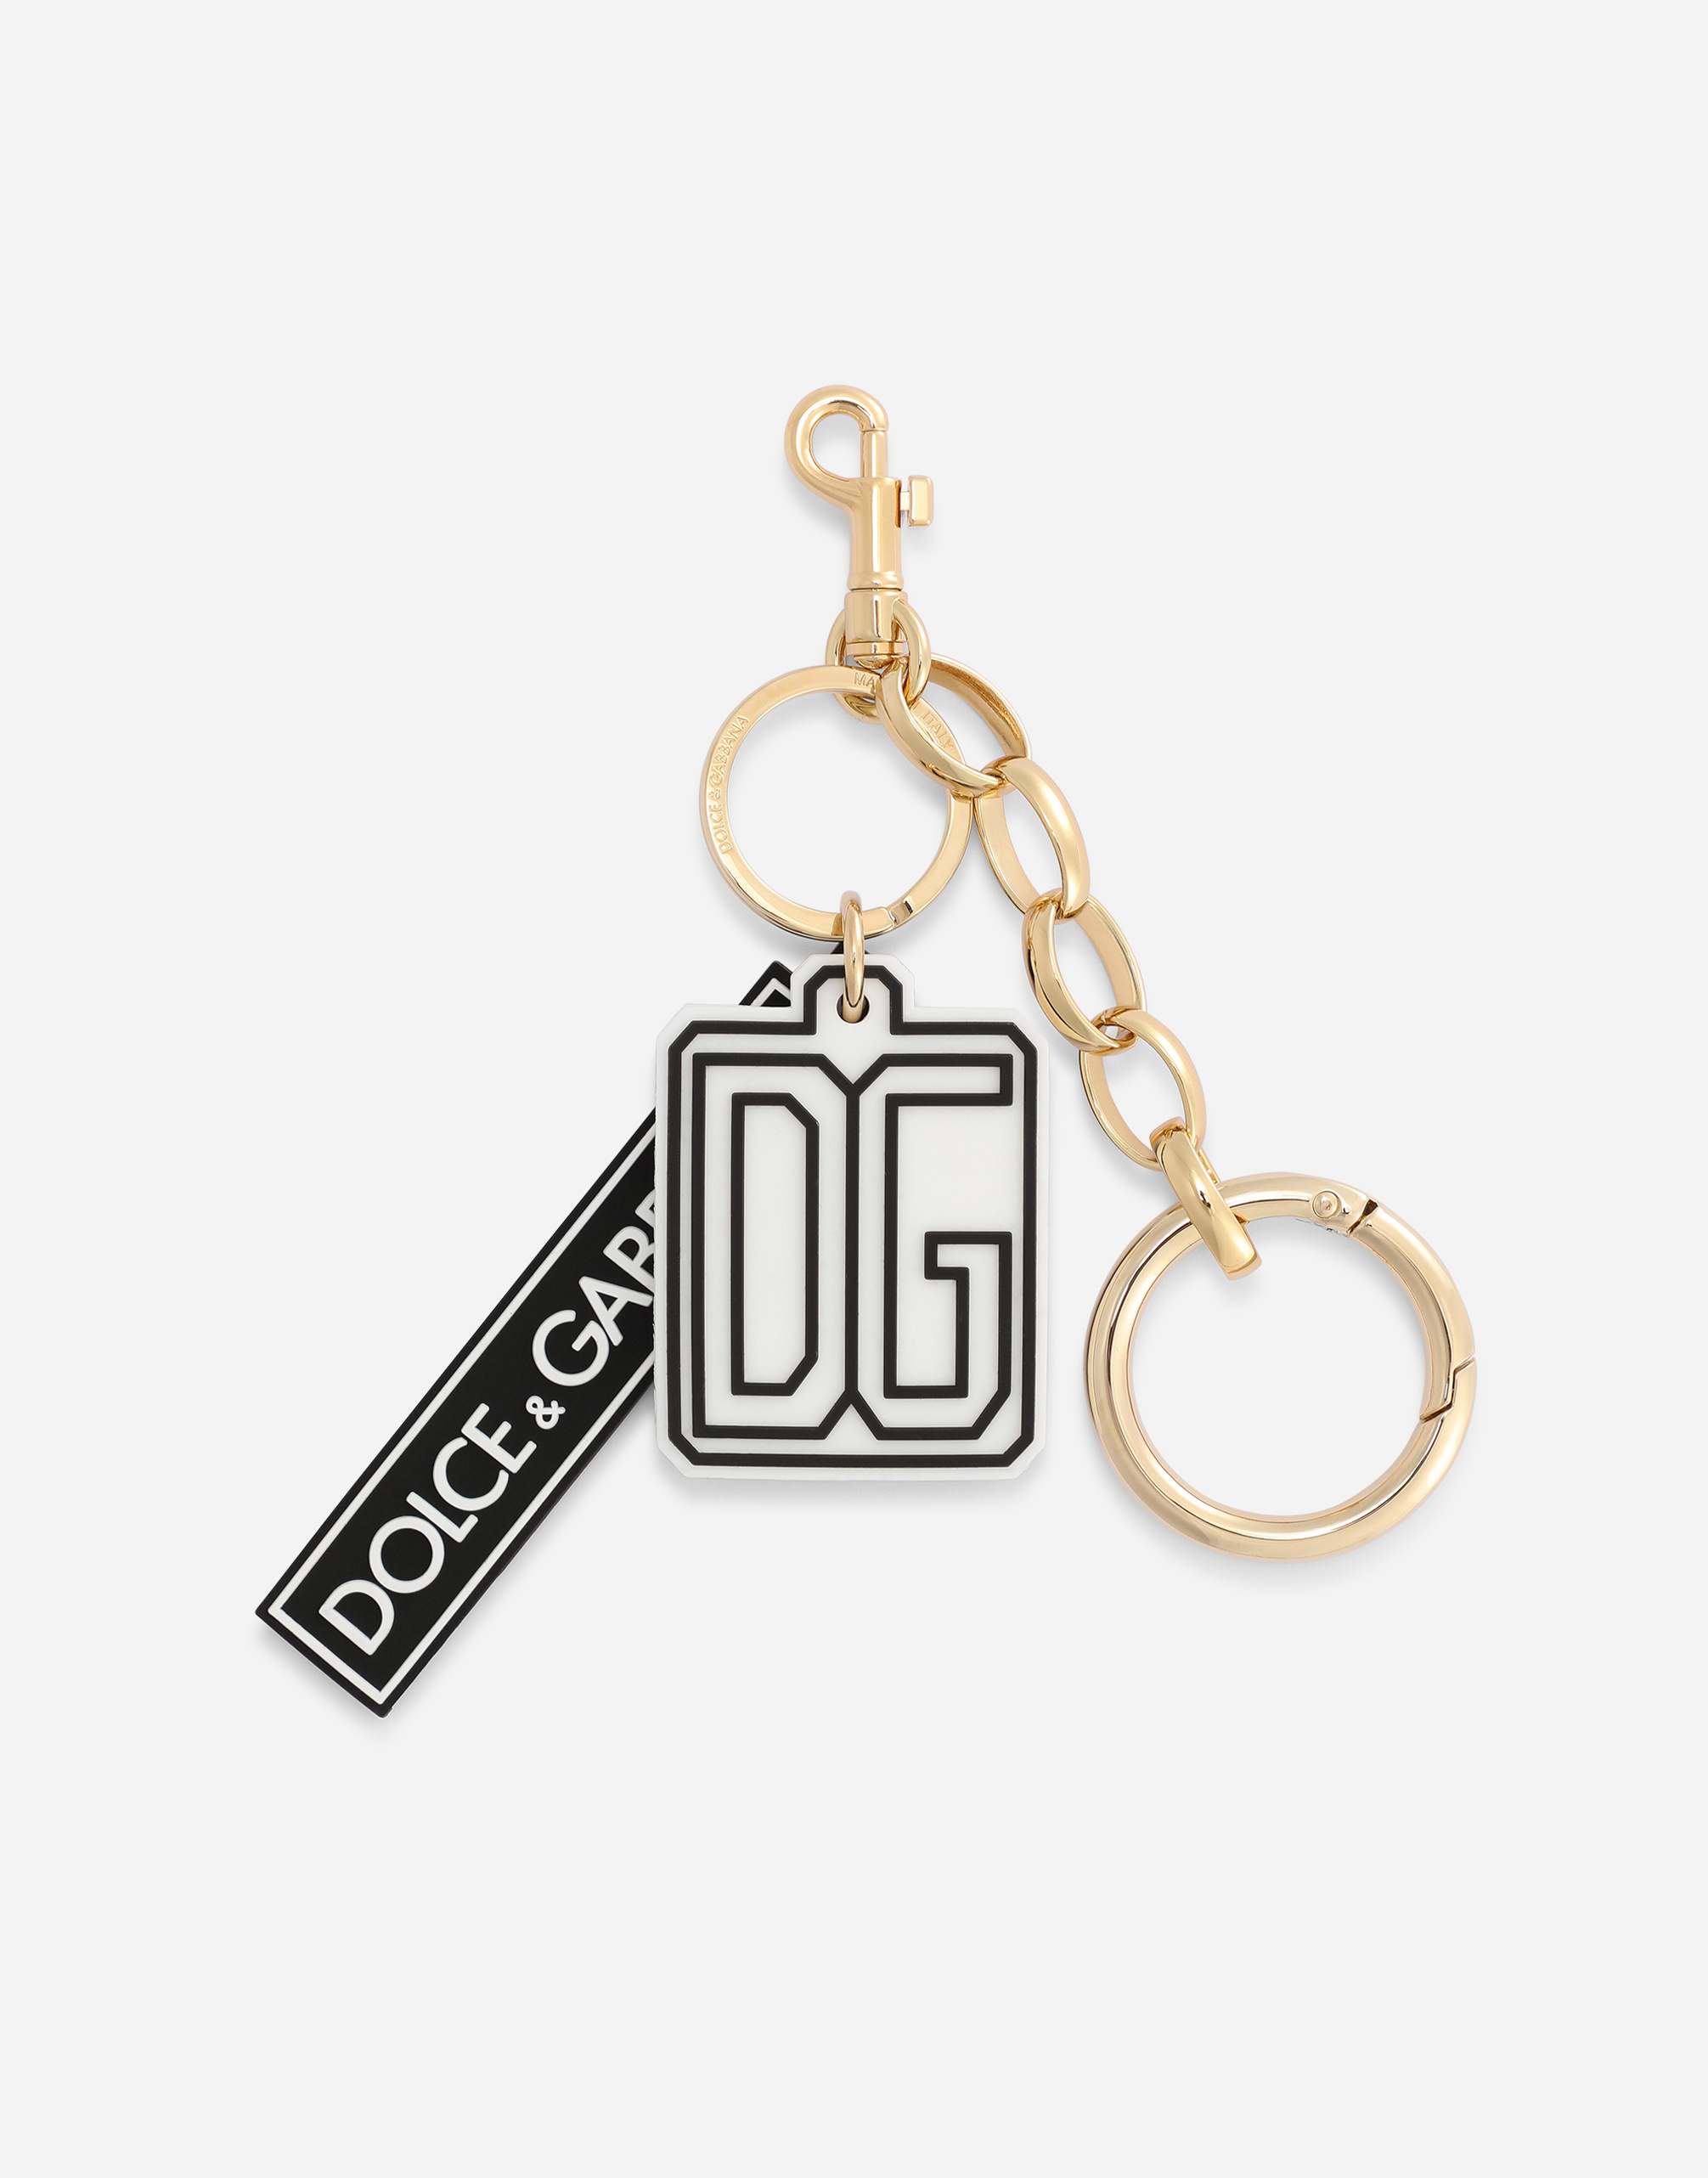 for Men Mens Jewellery Necklaces Metallic Dolce & Gabbana Key Chain/necklace With Multiple Dg Logos in Gold 